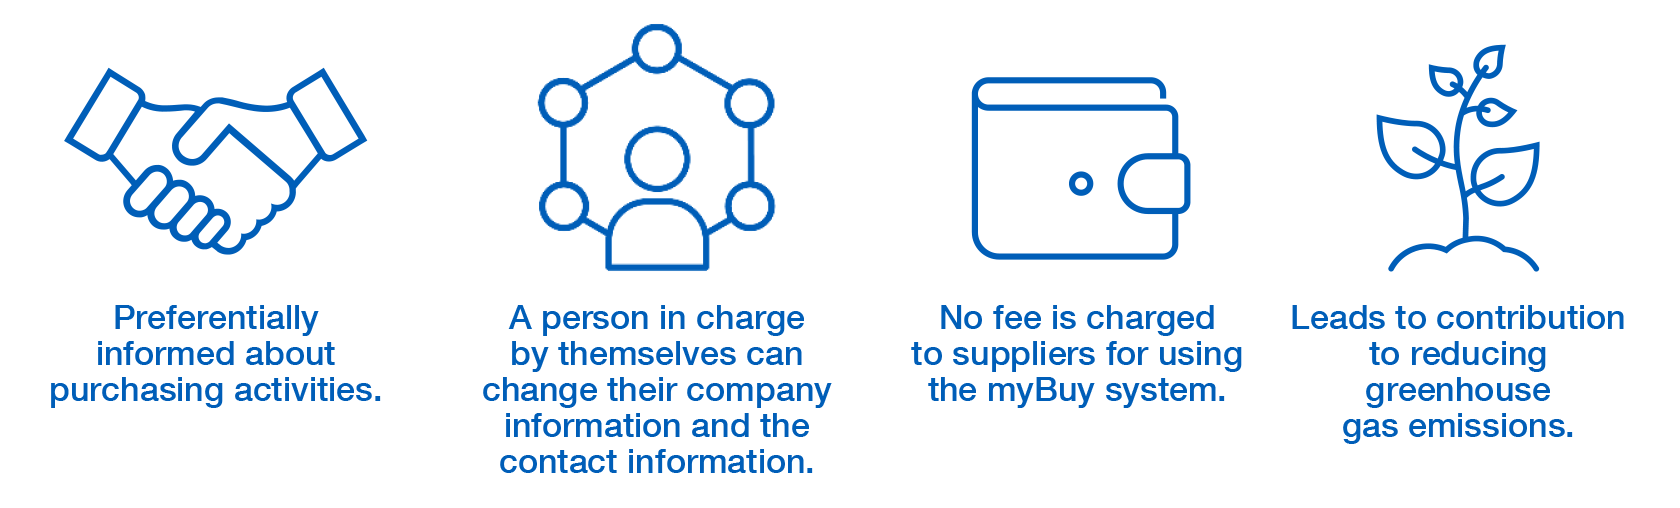 Benefits for suppliers Preferentially informed about purchasing activities.A person in charge by themselves can change their company information and the contact information.No fee is charged to suppliers for using the myBuy system.Leads to contribution to reducing greenhouse gas emissions.